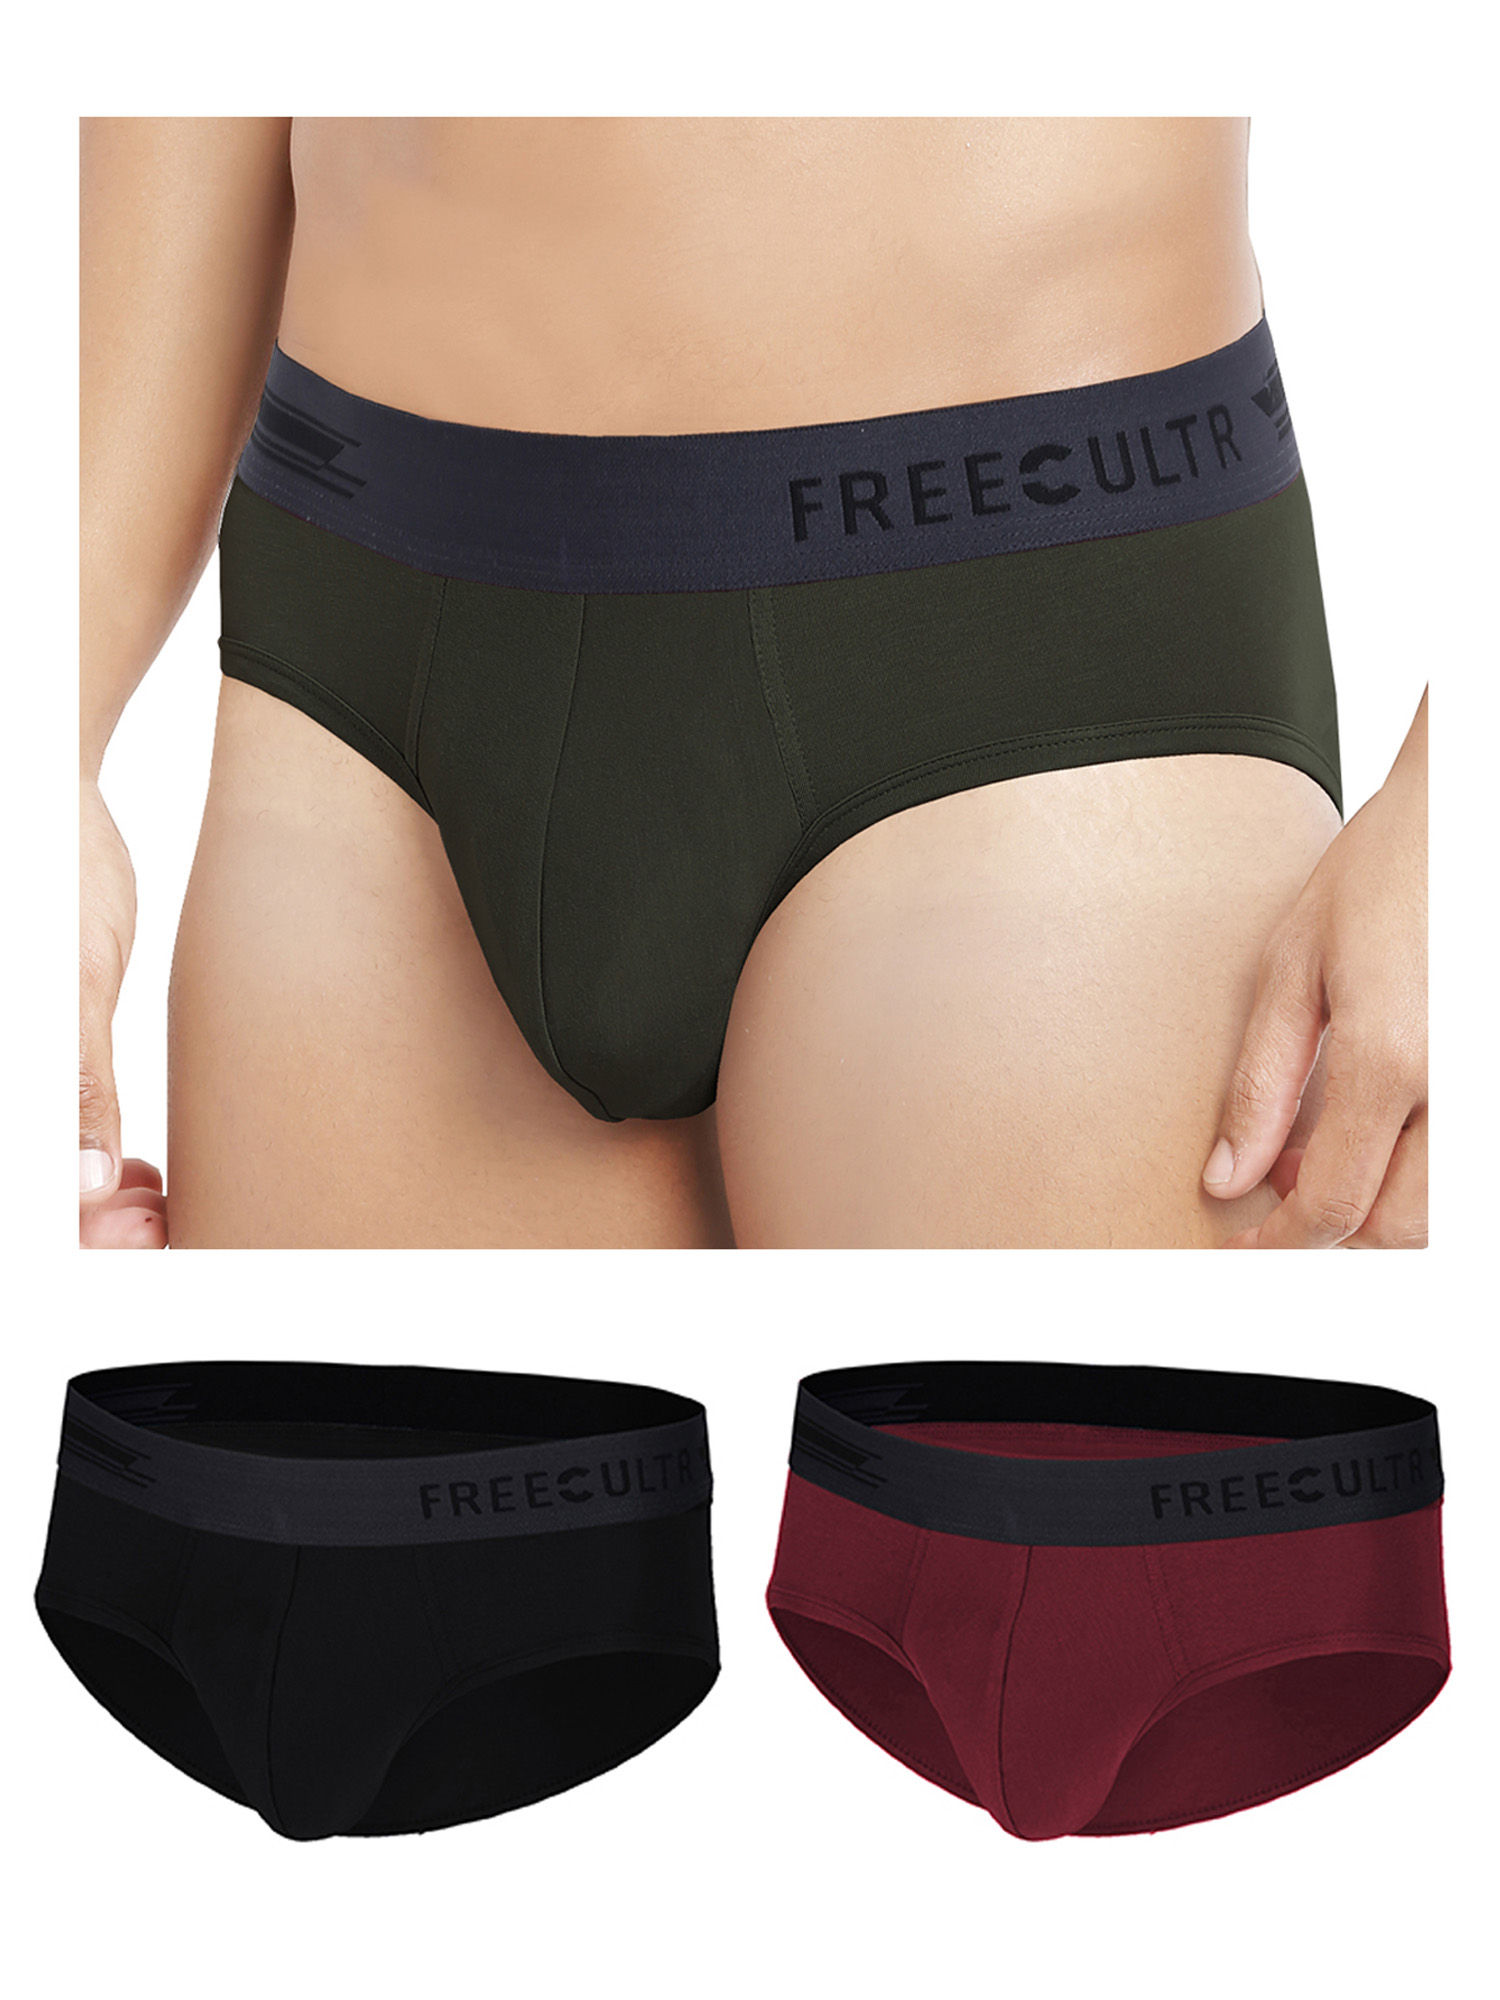 FREECULTR Anti-Microbial Air-Soft Micromodal Underwear Brief Pack Of 3 - Multi-Color (L)